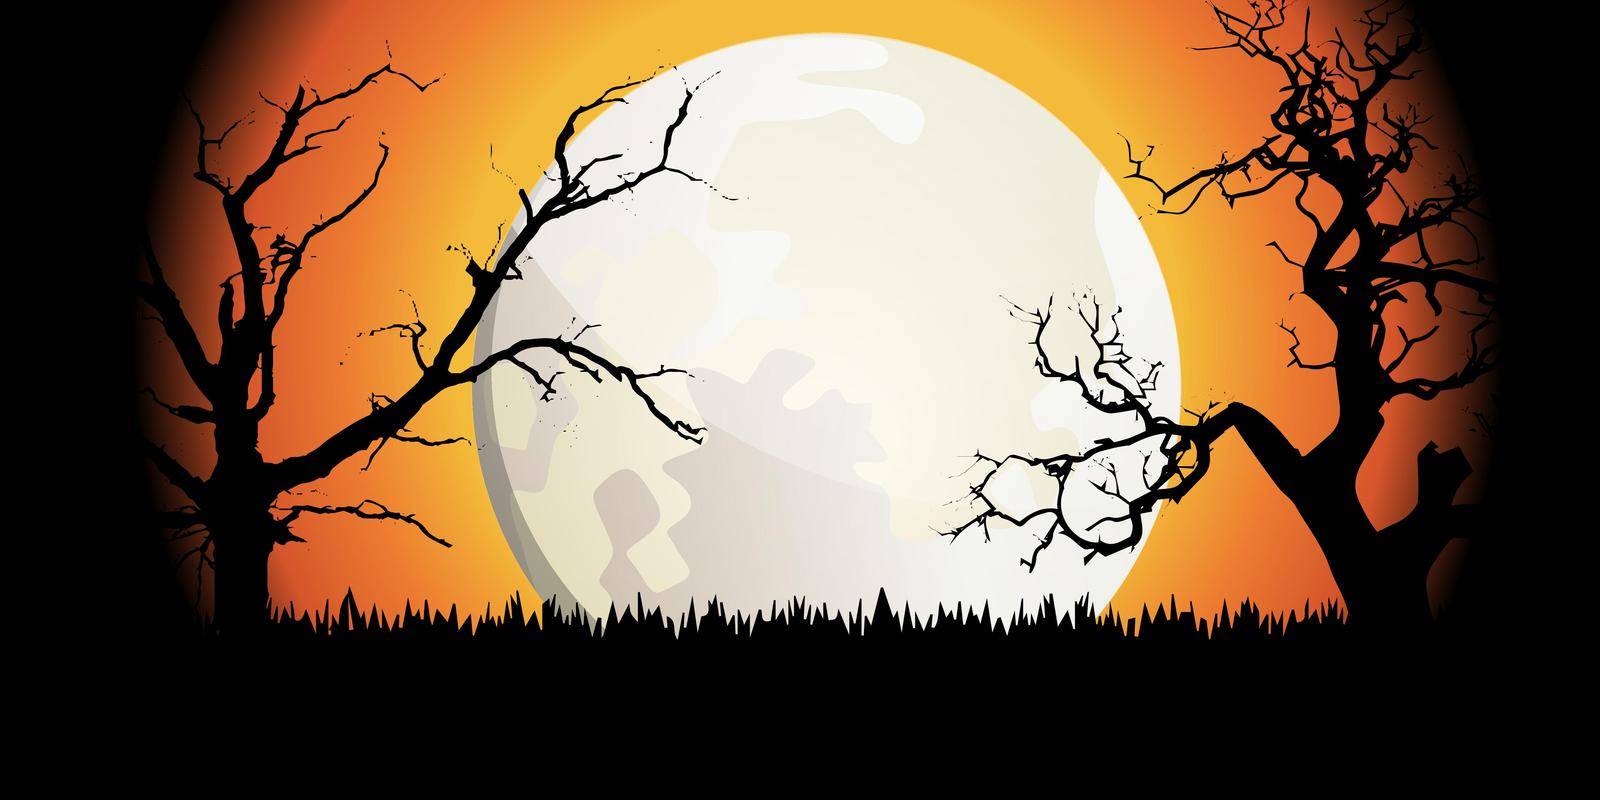 Halloween Theme Background with Full Moon and Trees Silhouettes. Vector Illustration by manuGmzDesigns